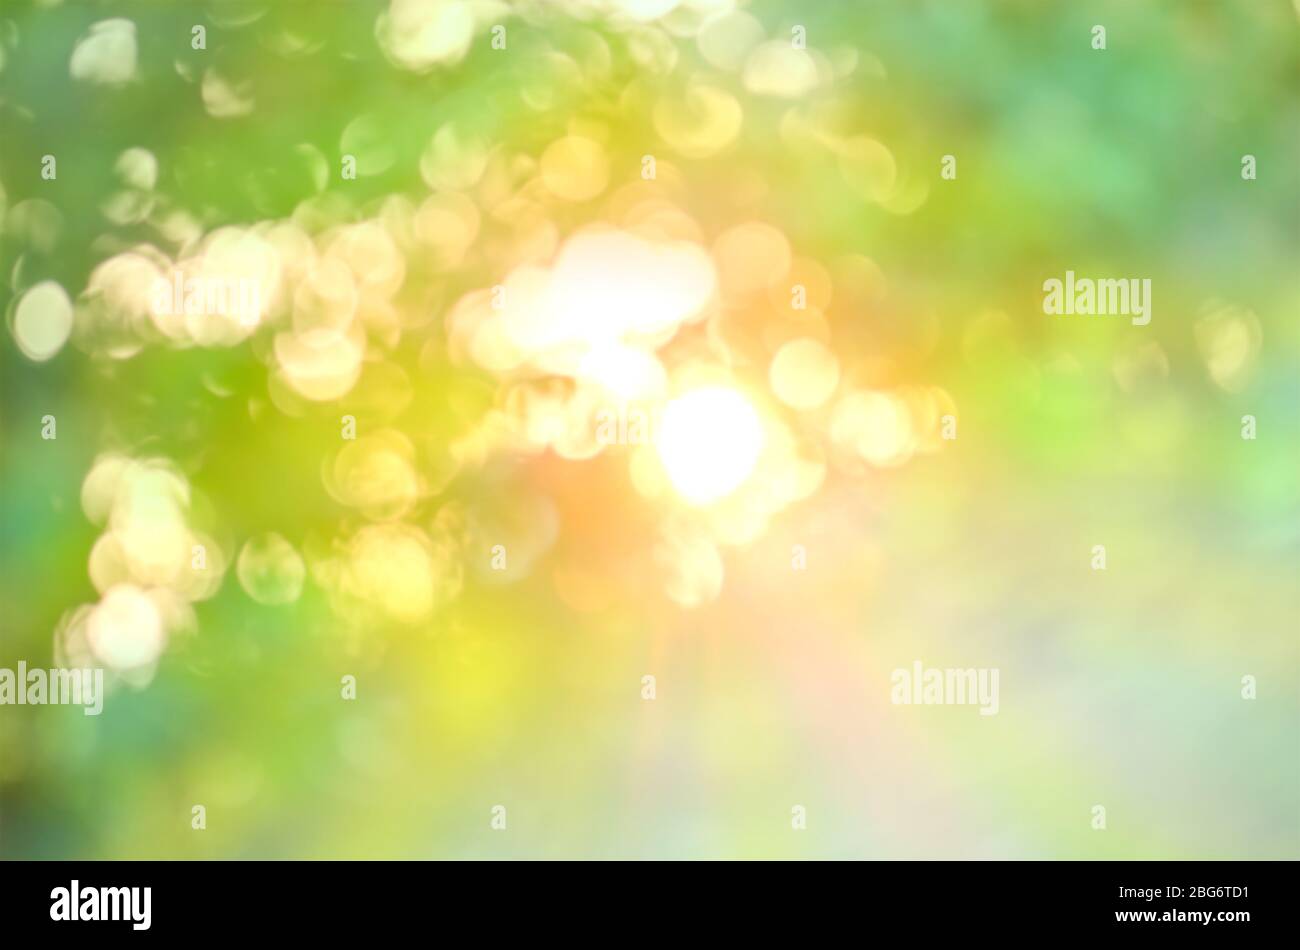 Green nature defocus abstract blur background. Natural blurred ...